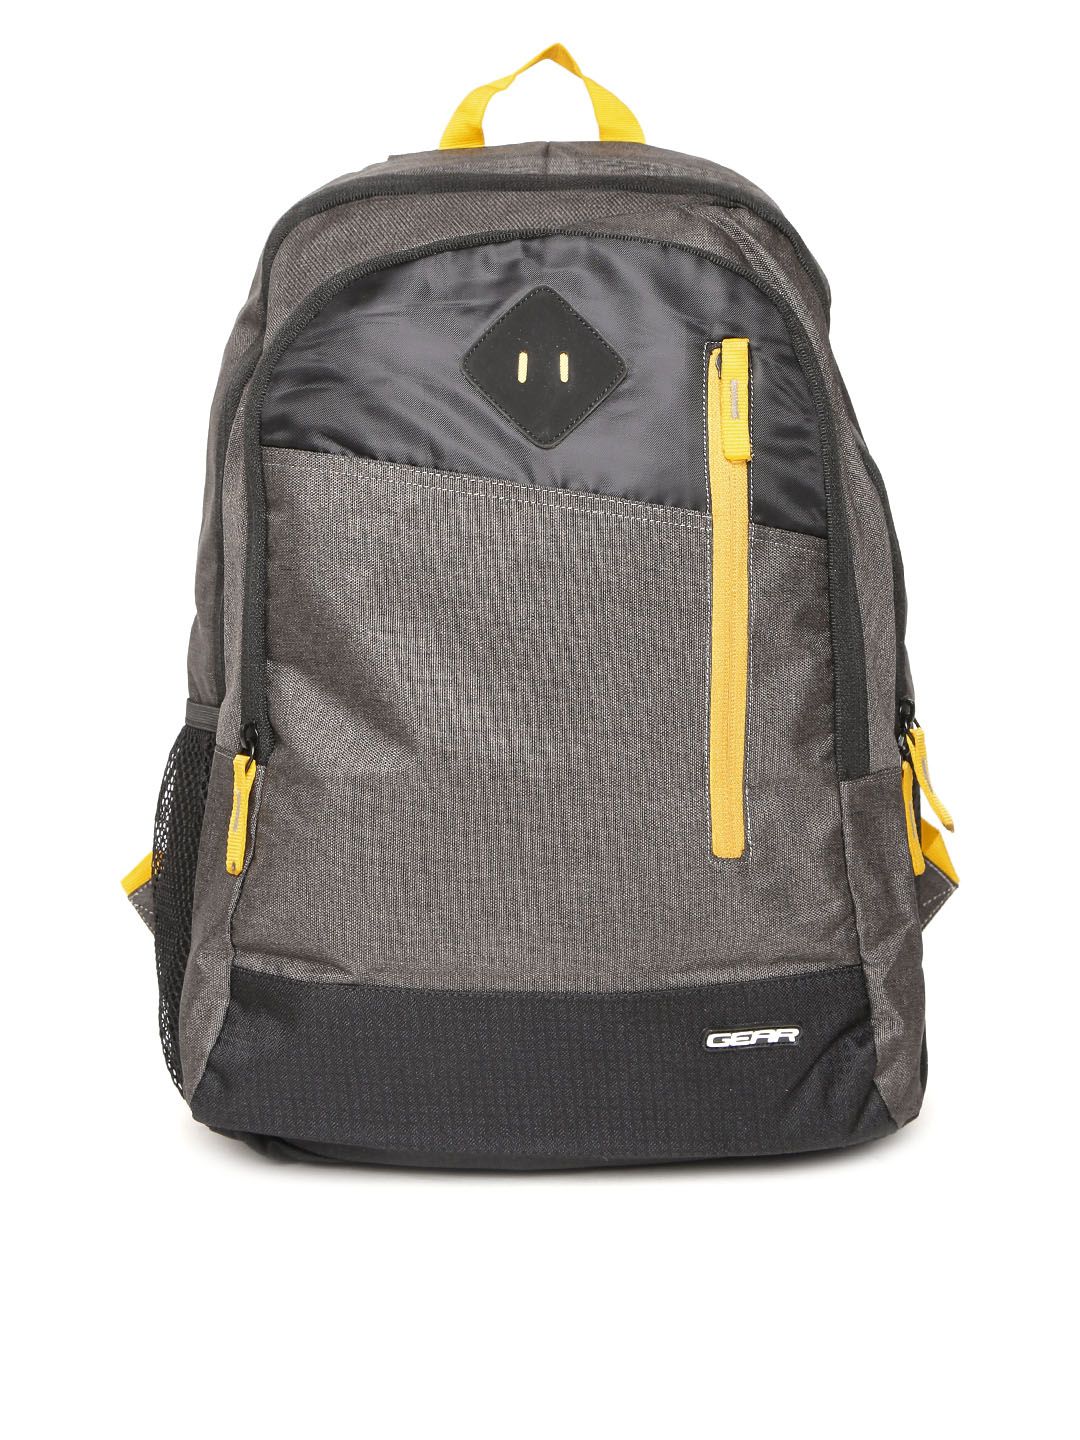 Gear Unisex Grey Solid Dual Backpack Price in India